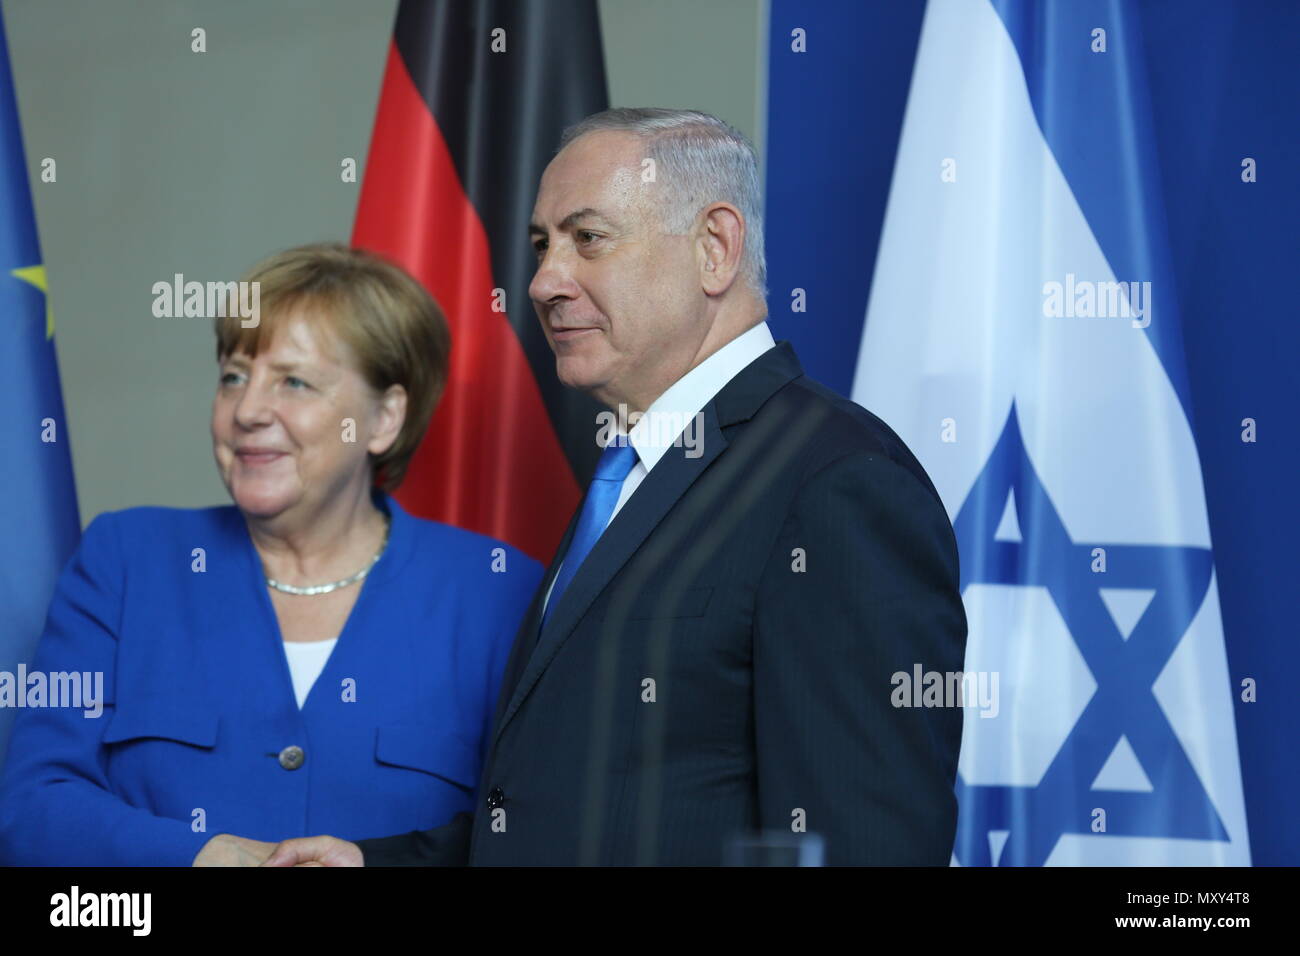 Berlin, Germany. 04th June, 2018. Chancellor Angela Merkel and Israeli Prime Minister Benjamin Netanyahu at the press conference in the Federal Chancellery in Berlin. Credit: Jyoti Kapoor/Pacific Press/Alamy Live News Stock Photo